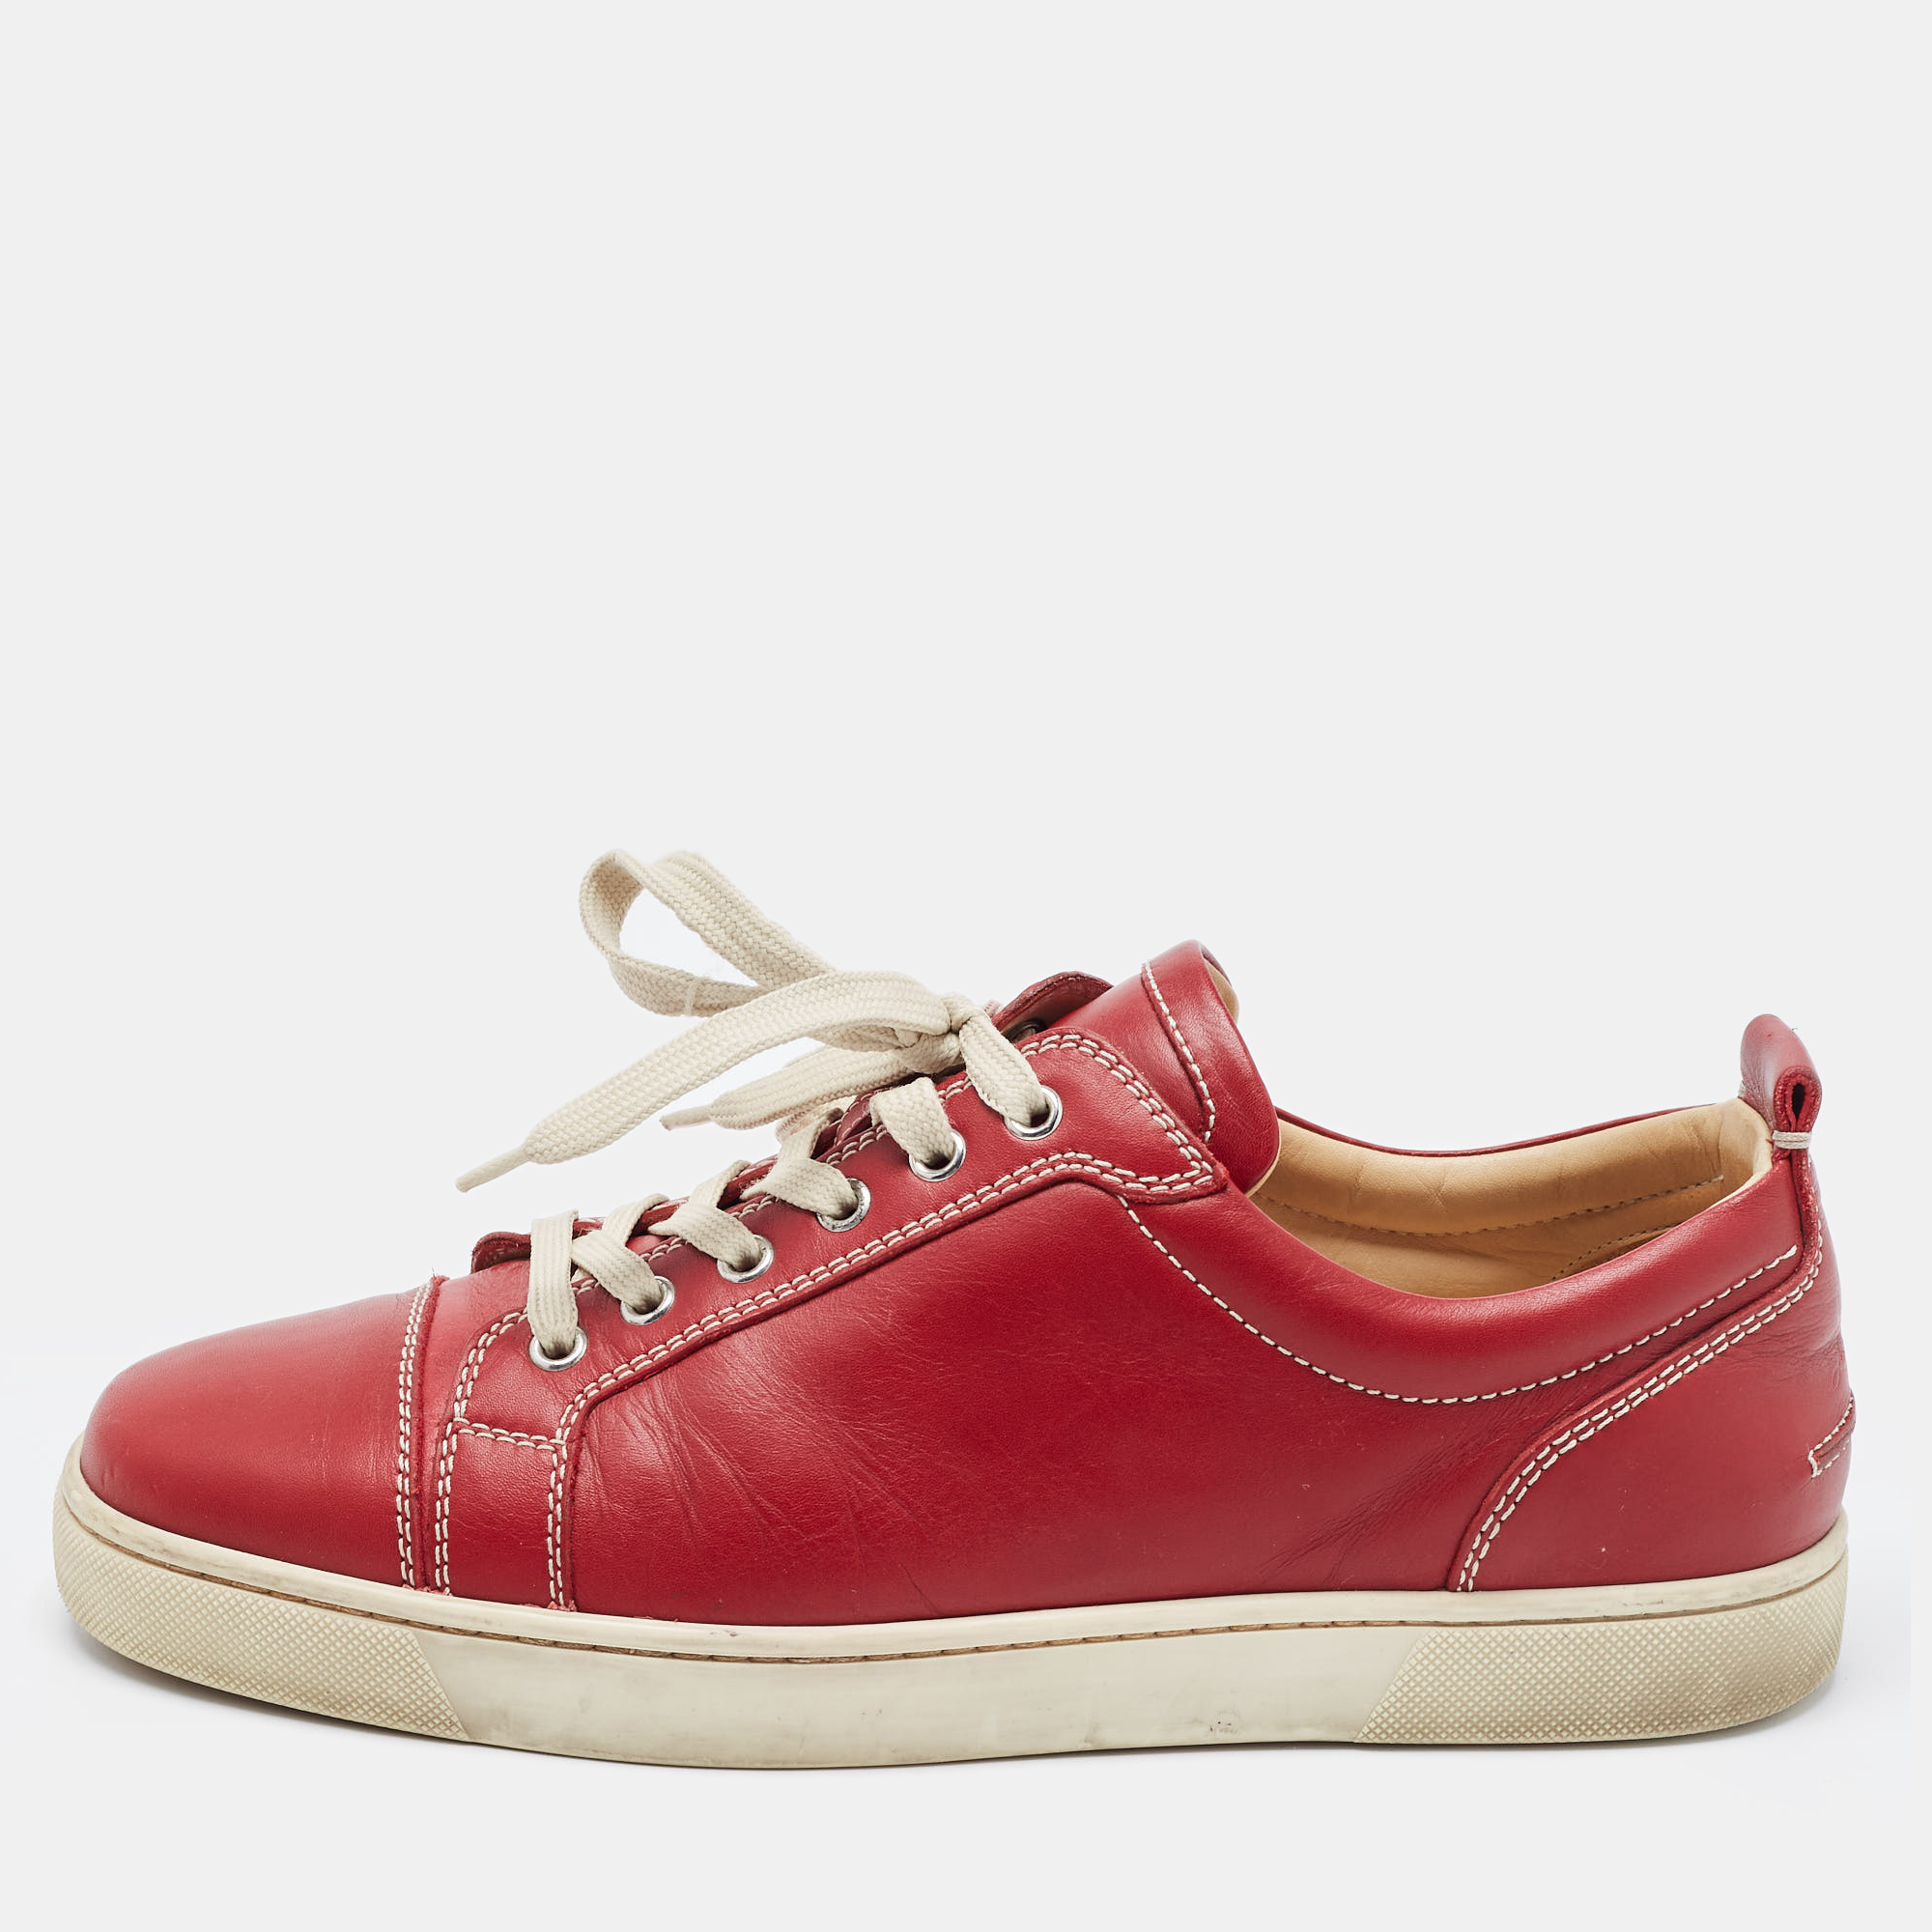 Christian Louboutin Red Leather Sneakers Size 42.5